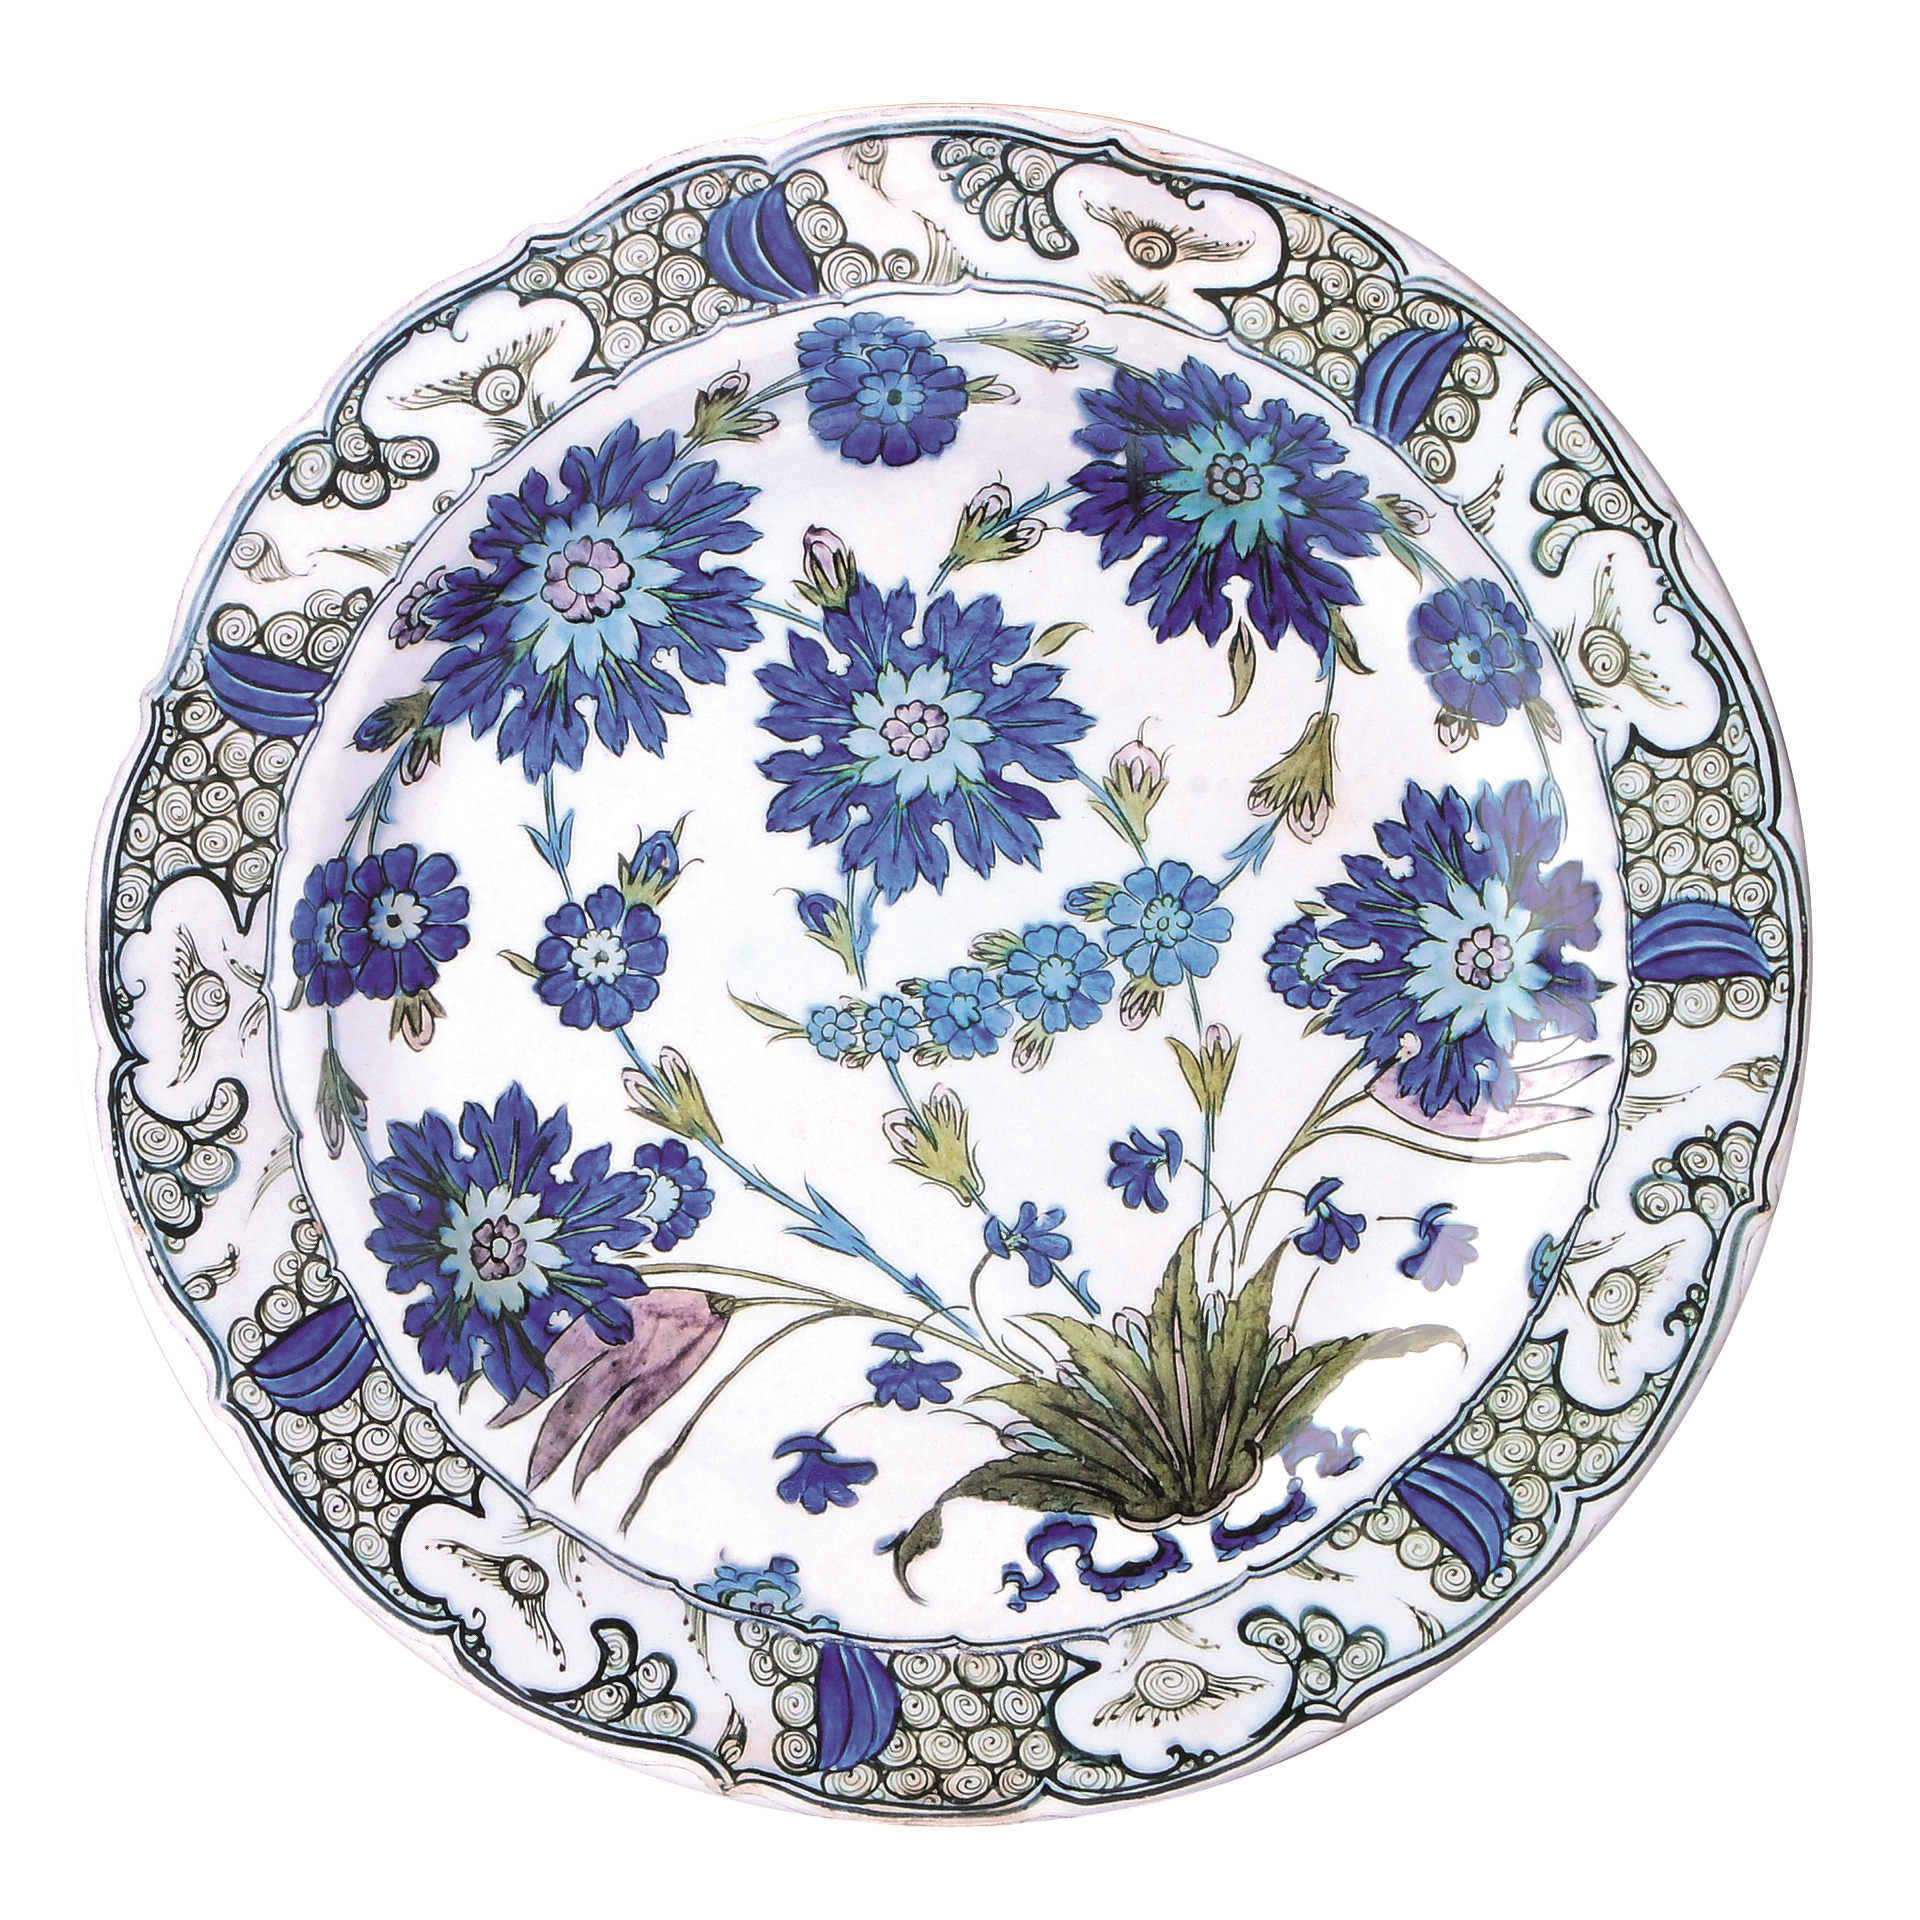 Enamelled tin plate with floral design in shades of blue on white background. From the Iznik ceramics collection of the Fitzwilliam Museum. 